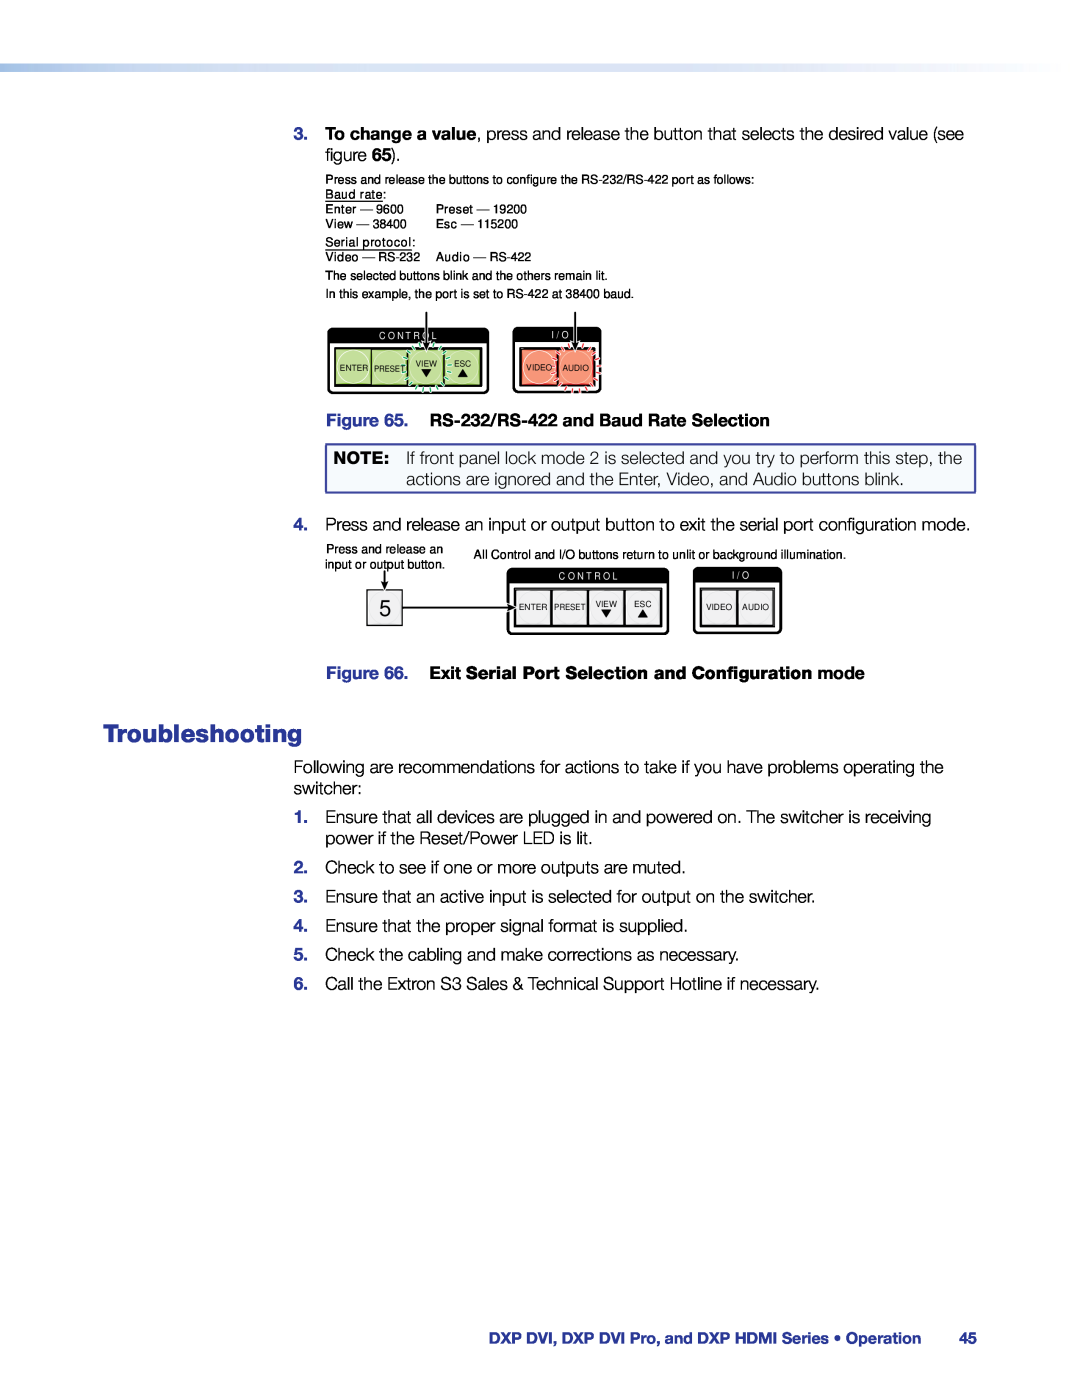 Extron electronic DXP DVI PRO manual Troubleshooting, RS-232/RS-422 and Baud Rate Selection 